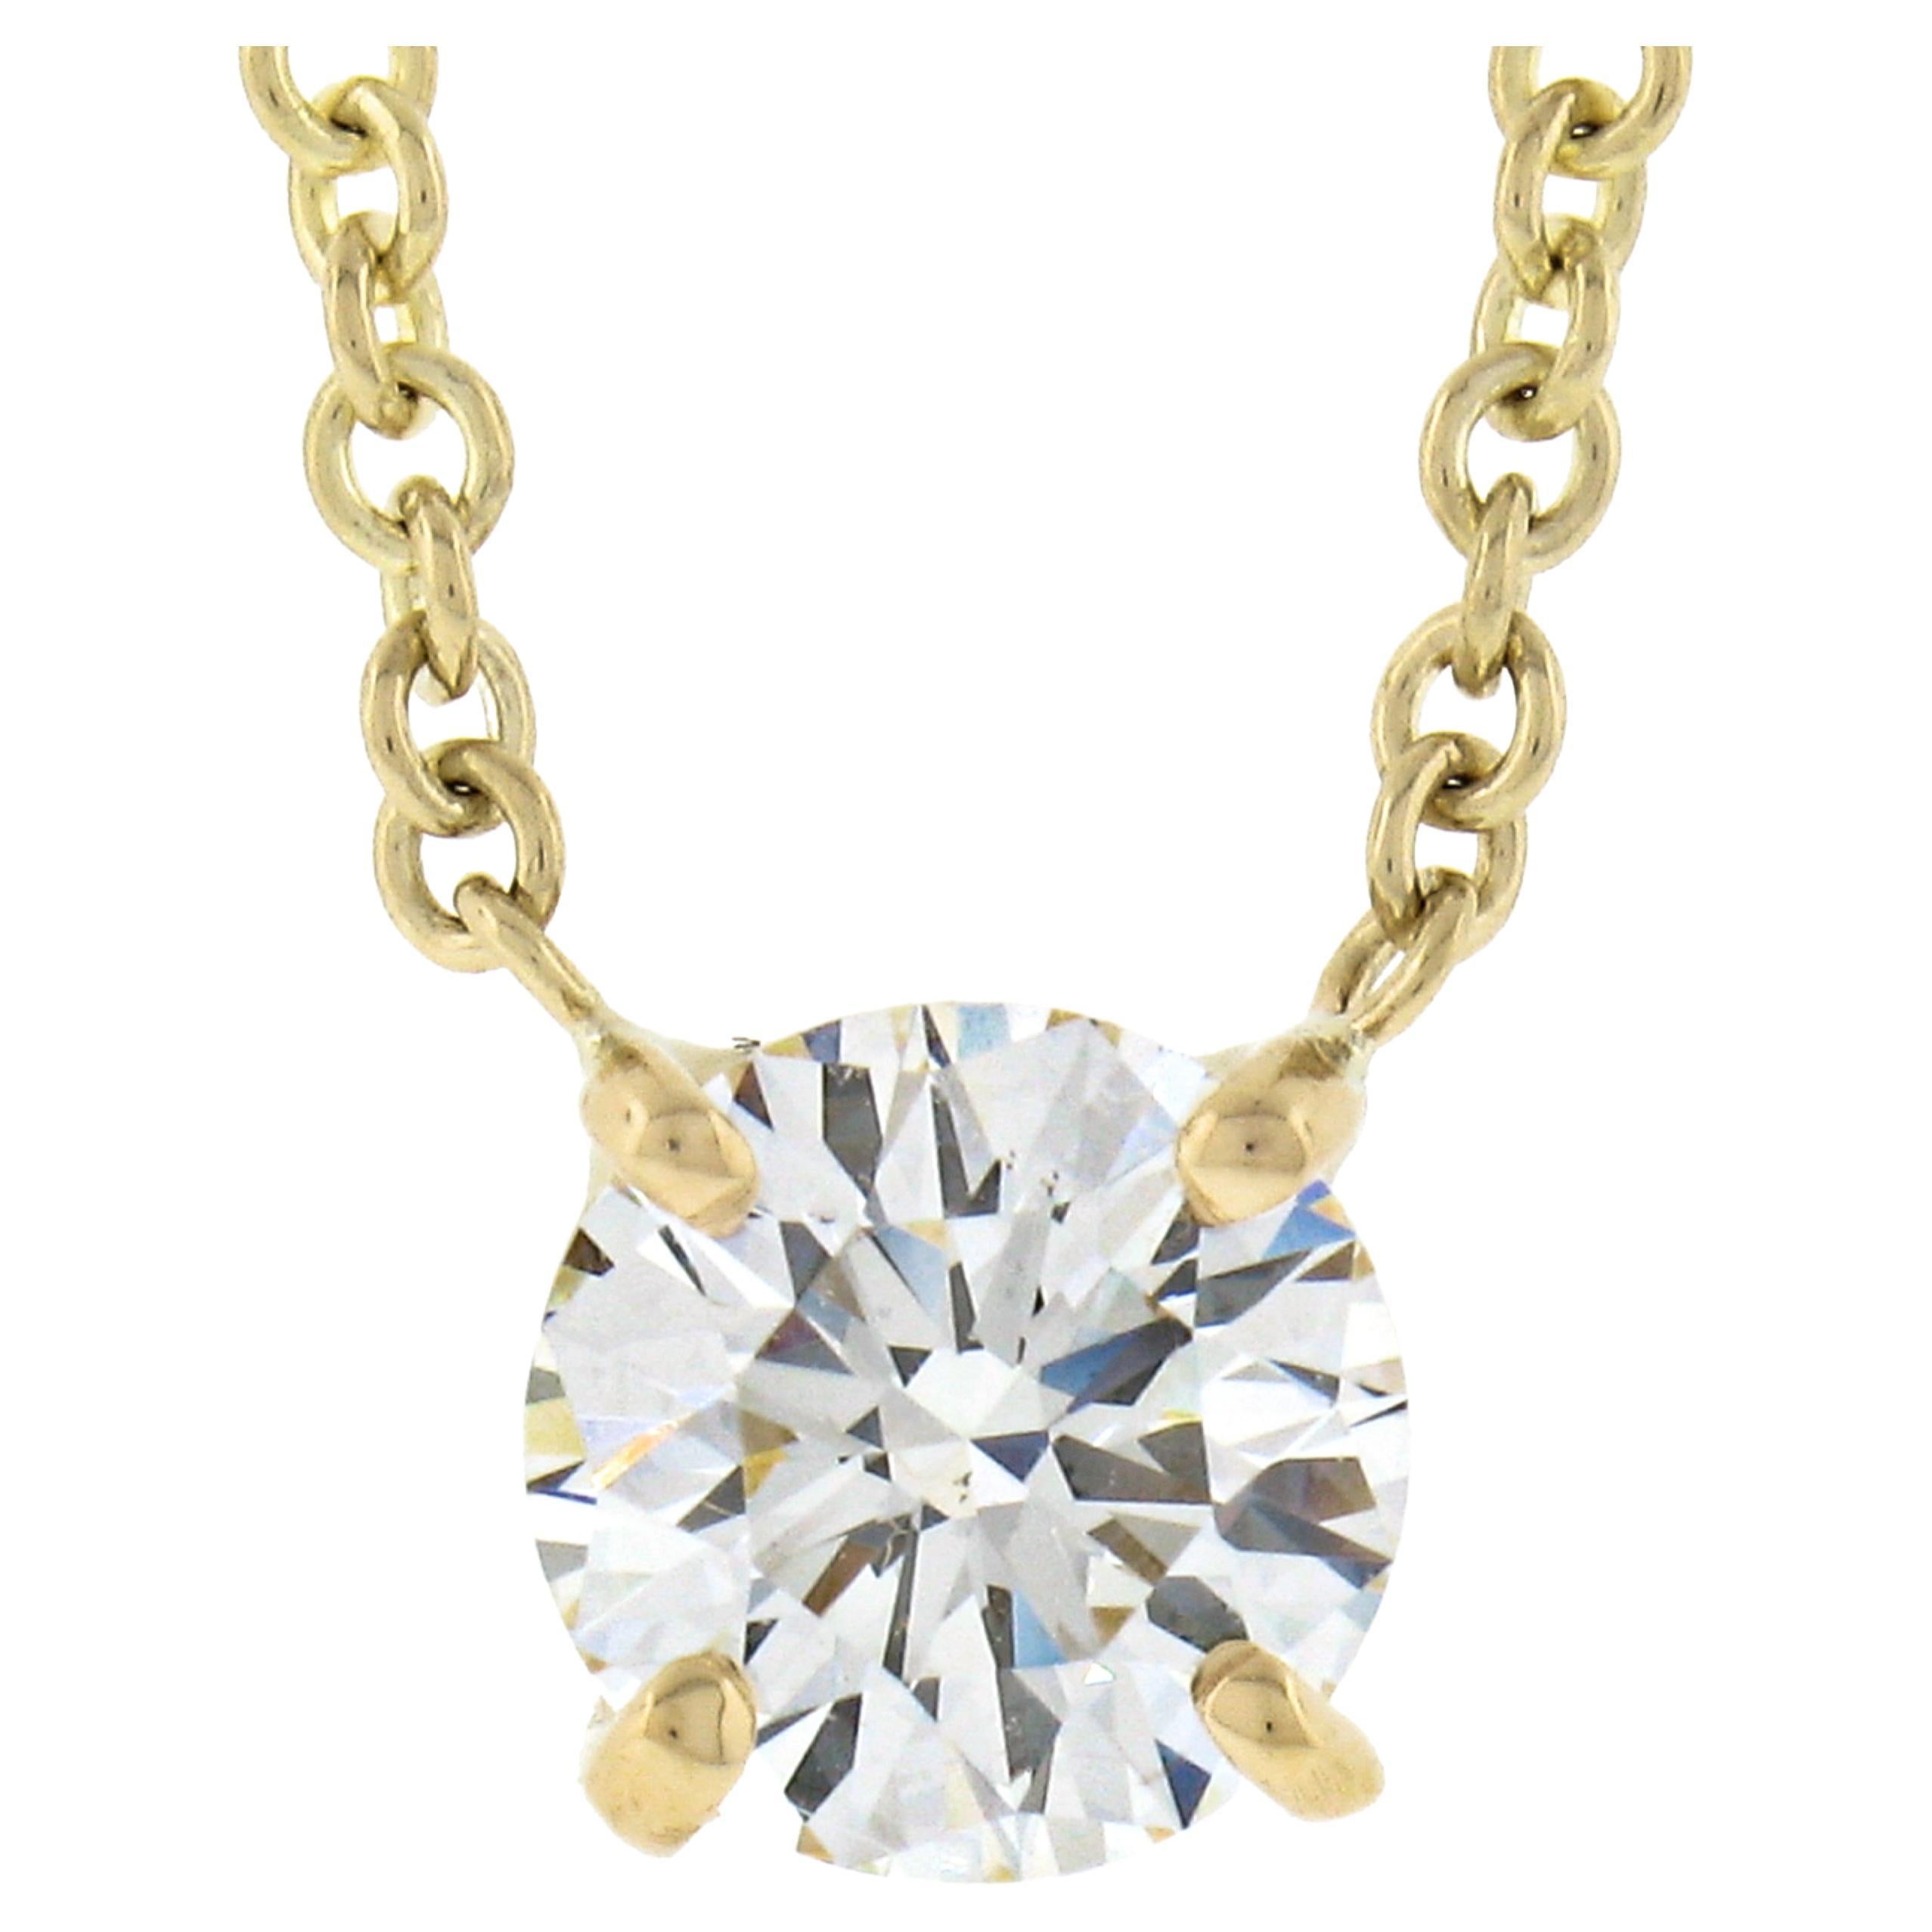 New Classic 14k Yellow Gold .58ct Round Prong Diamond Solitaire Pendant Necklace